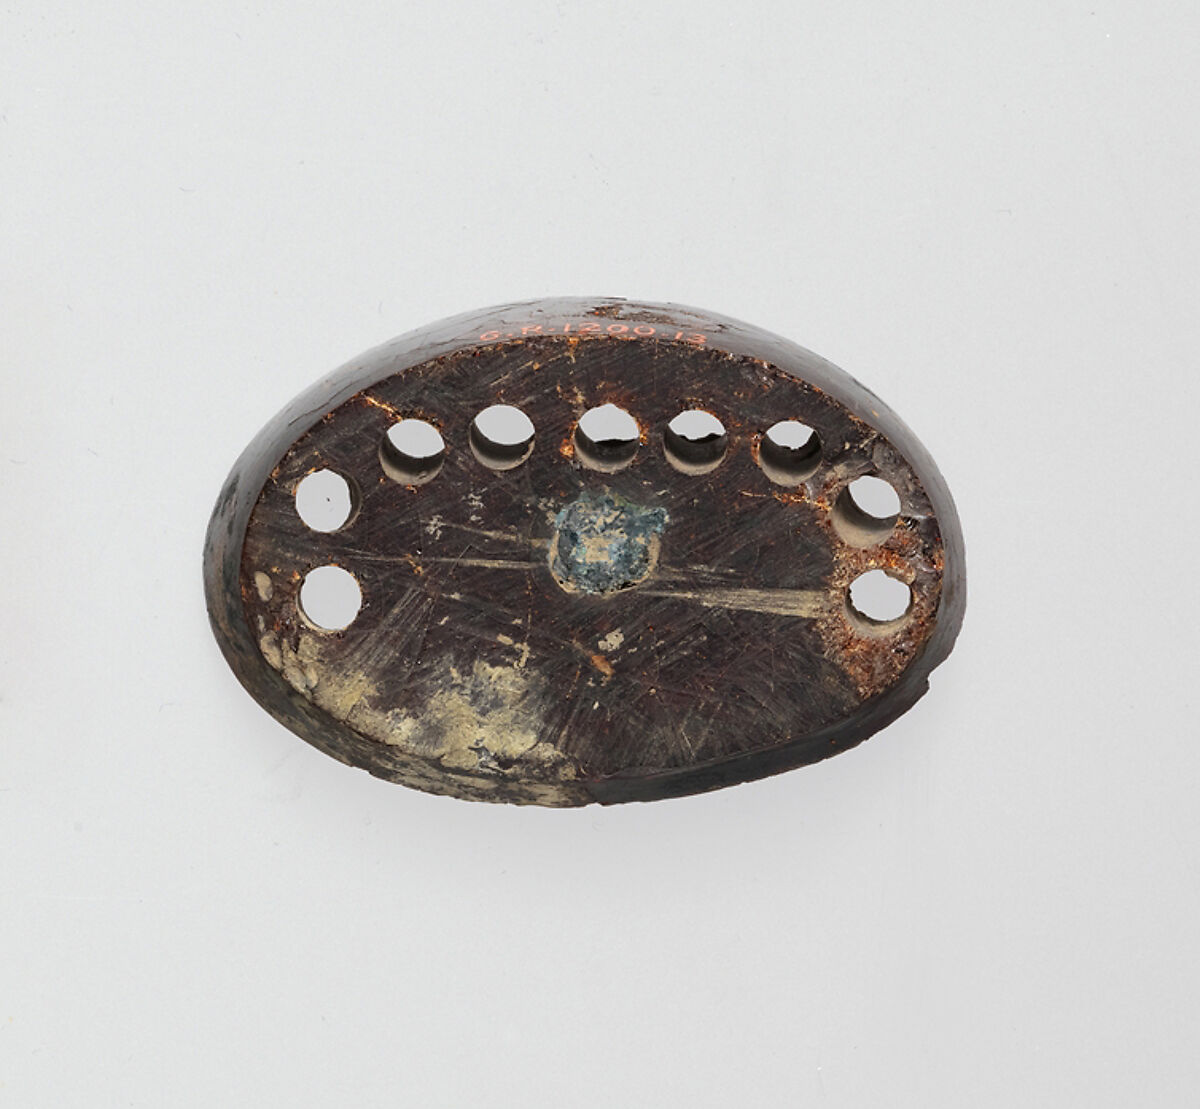 Segment from a bronze fibula (safety pin) | Etruscan | Archaic | The ...